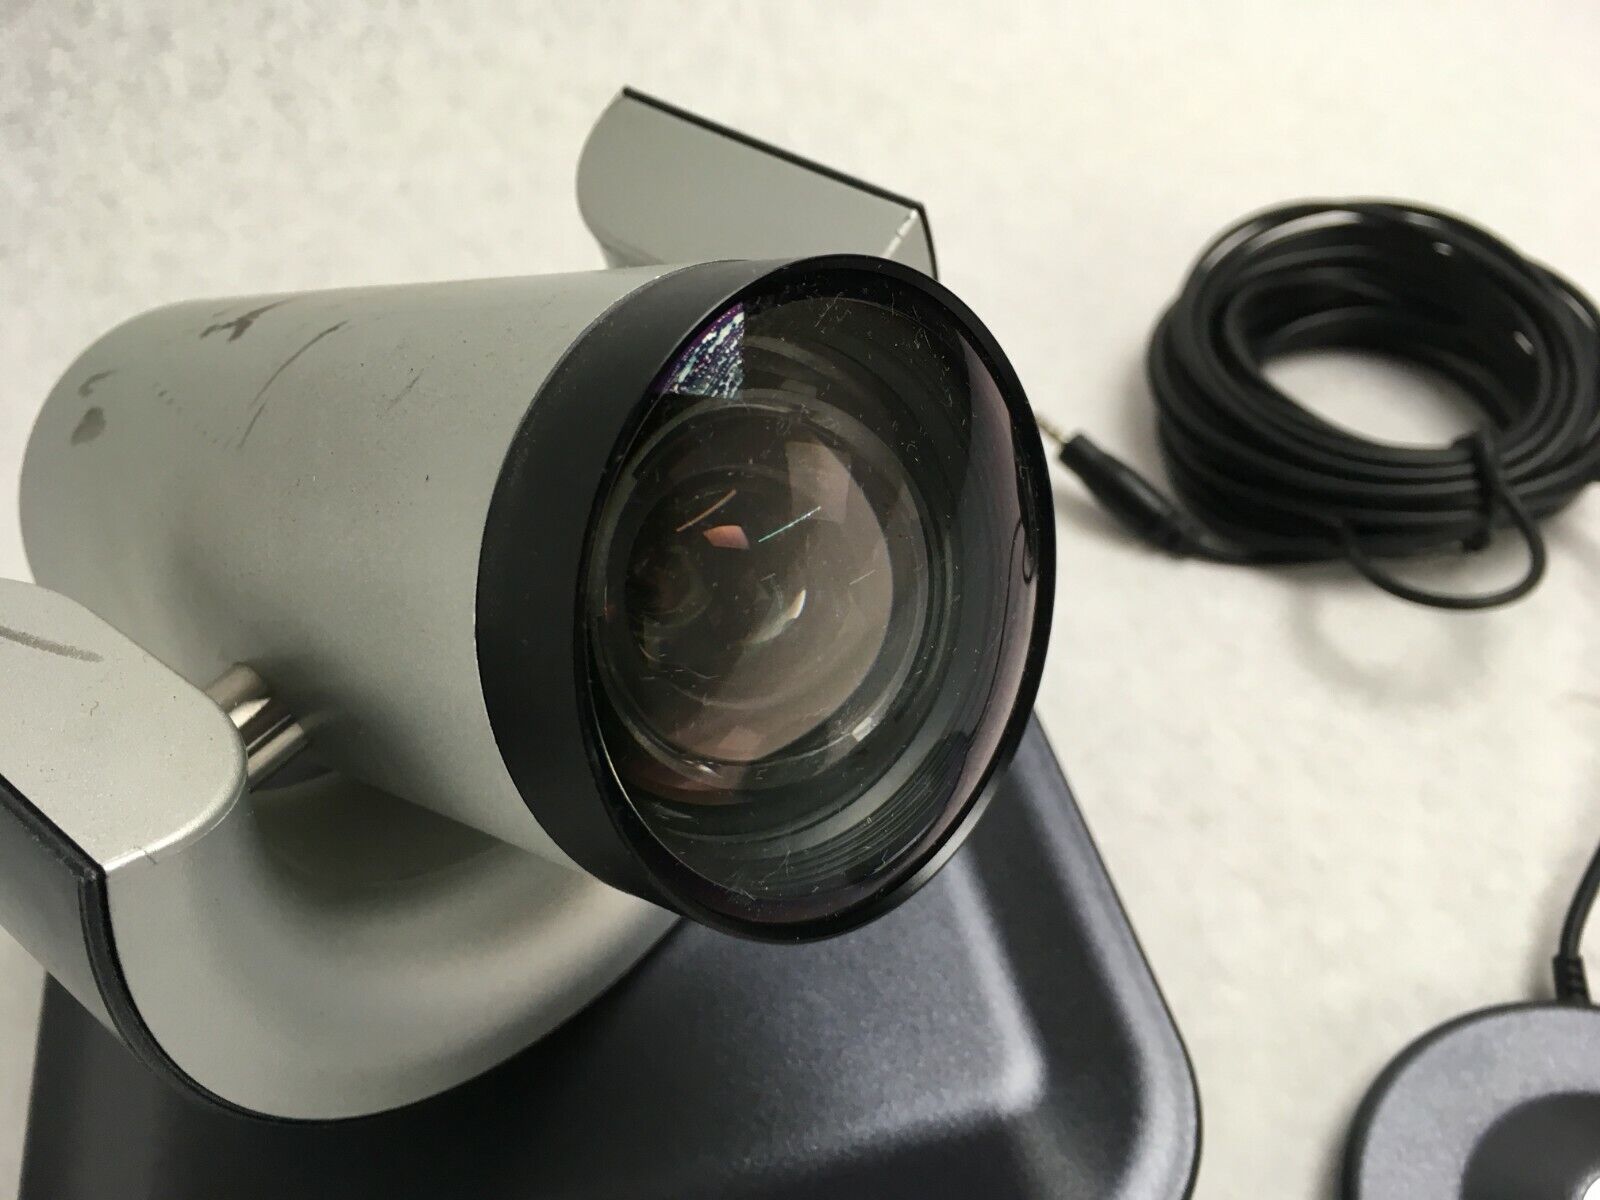 Lifesize Video Conferencing Camera 200 HD Pan Tilt Zoom With External Mic